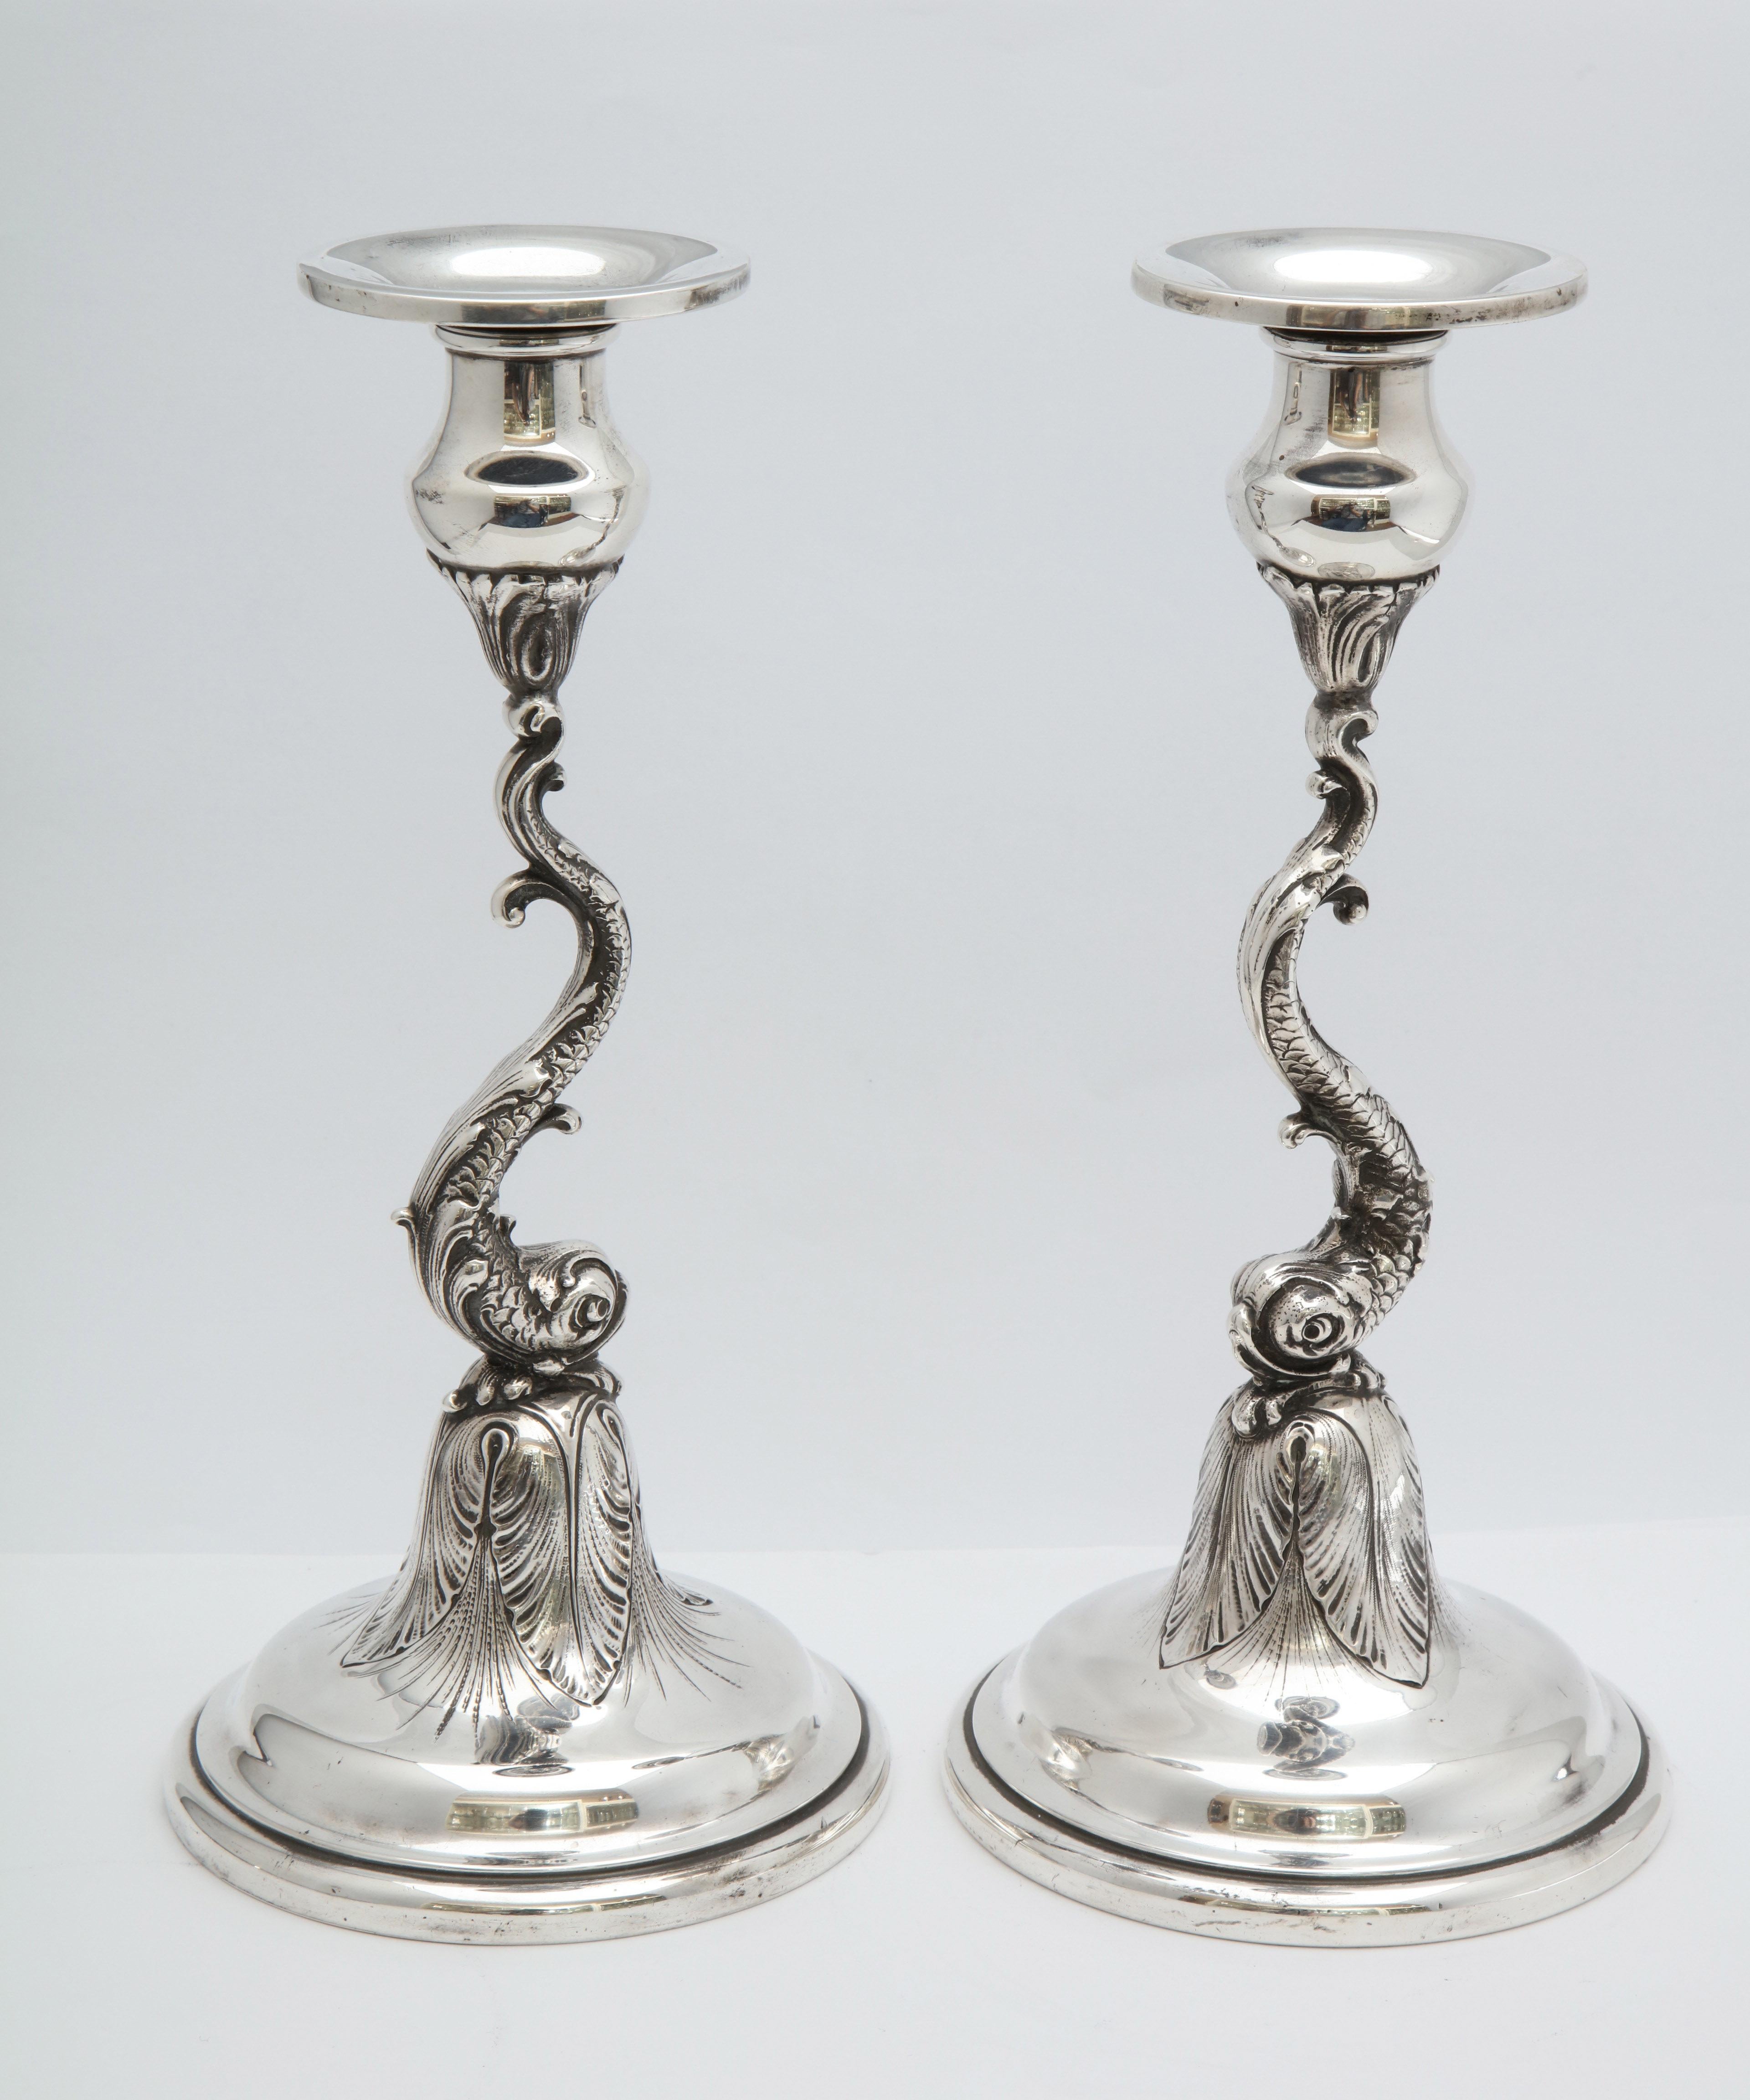 Pair of Art Nouveau Sterling Silver Dolphin-Form Candlesticks by Spaulding 3